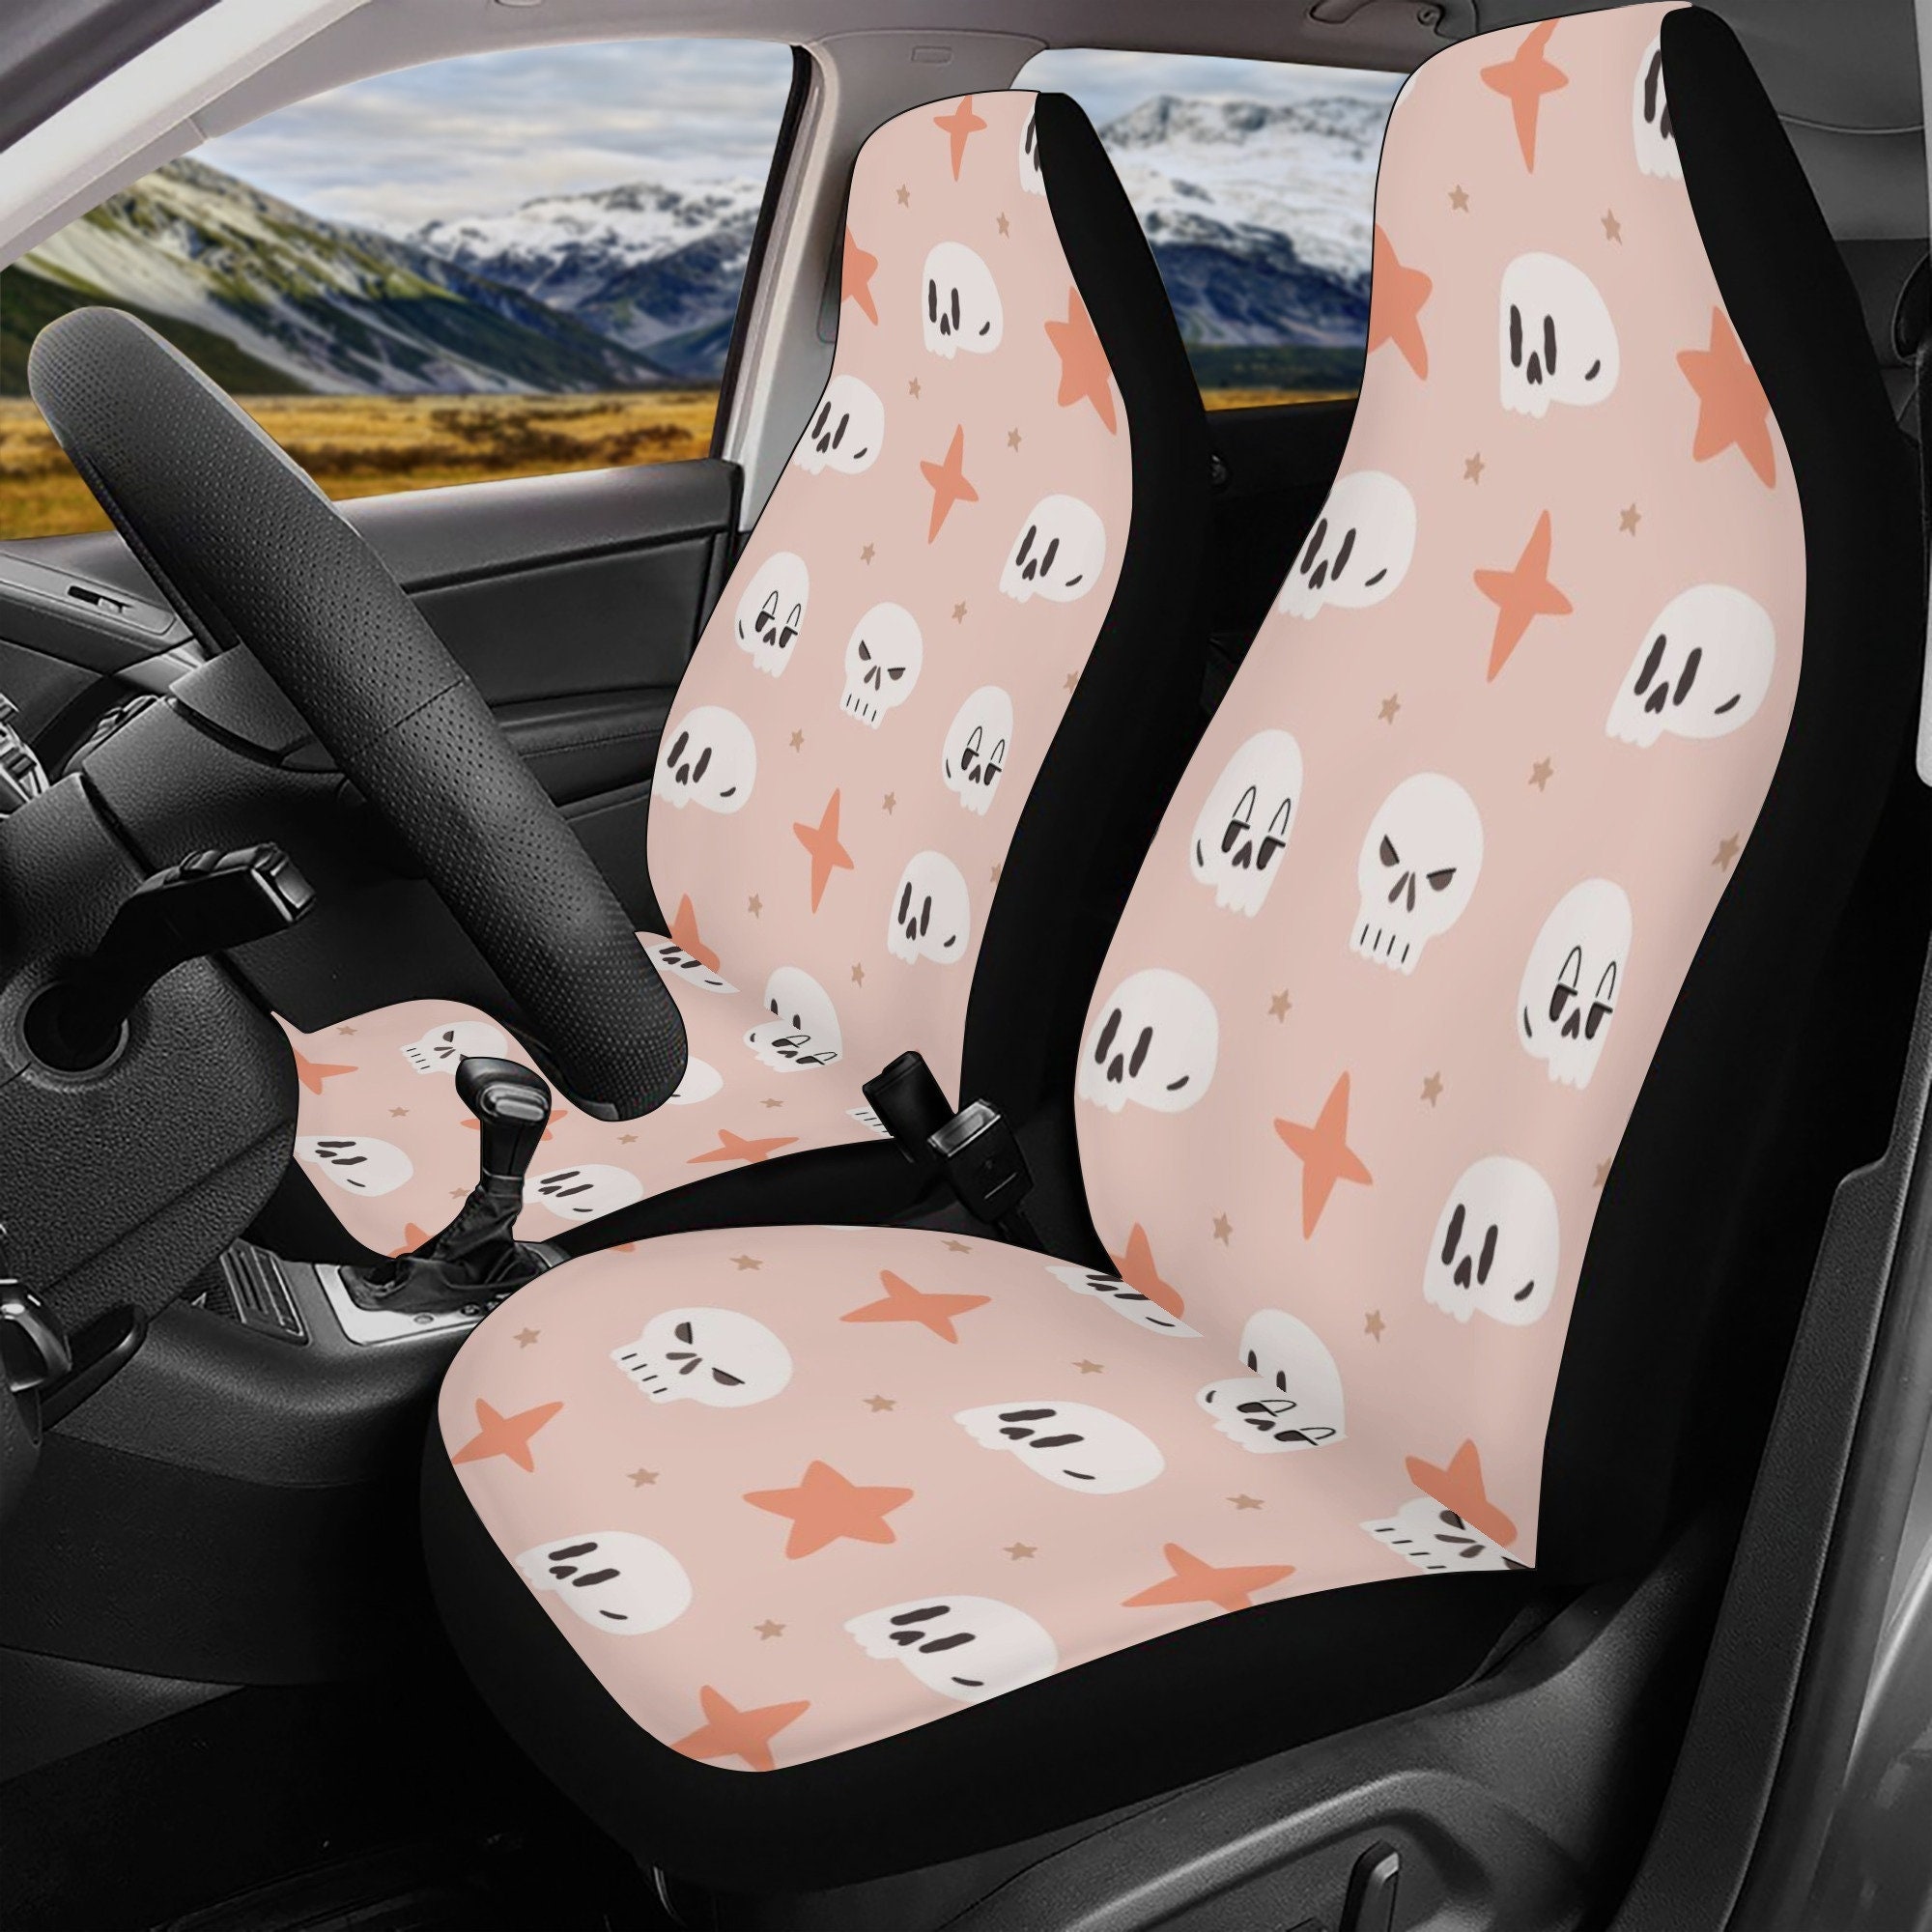 Discover Little Skull Car Seat Cover Set